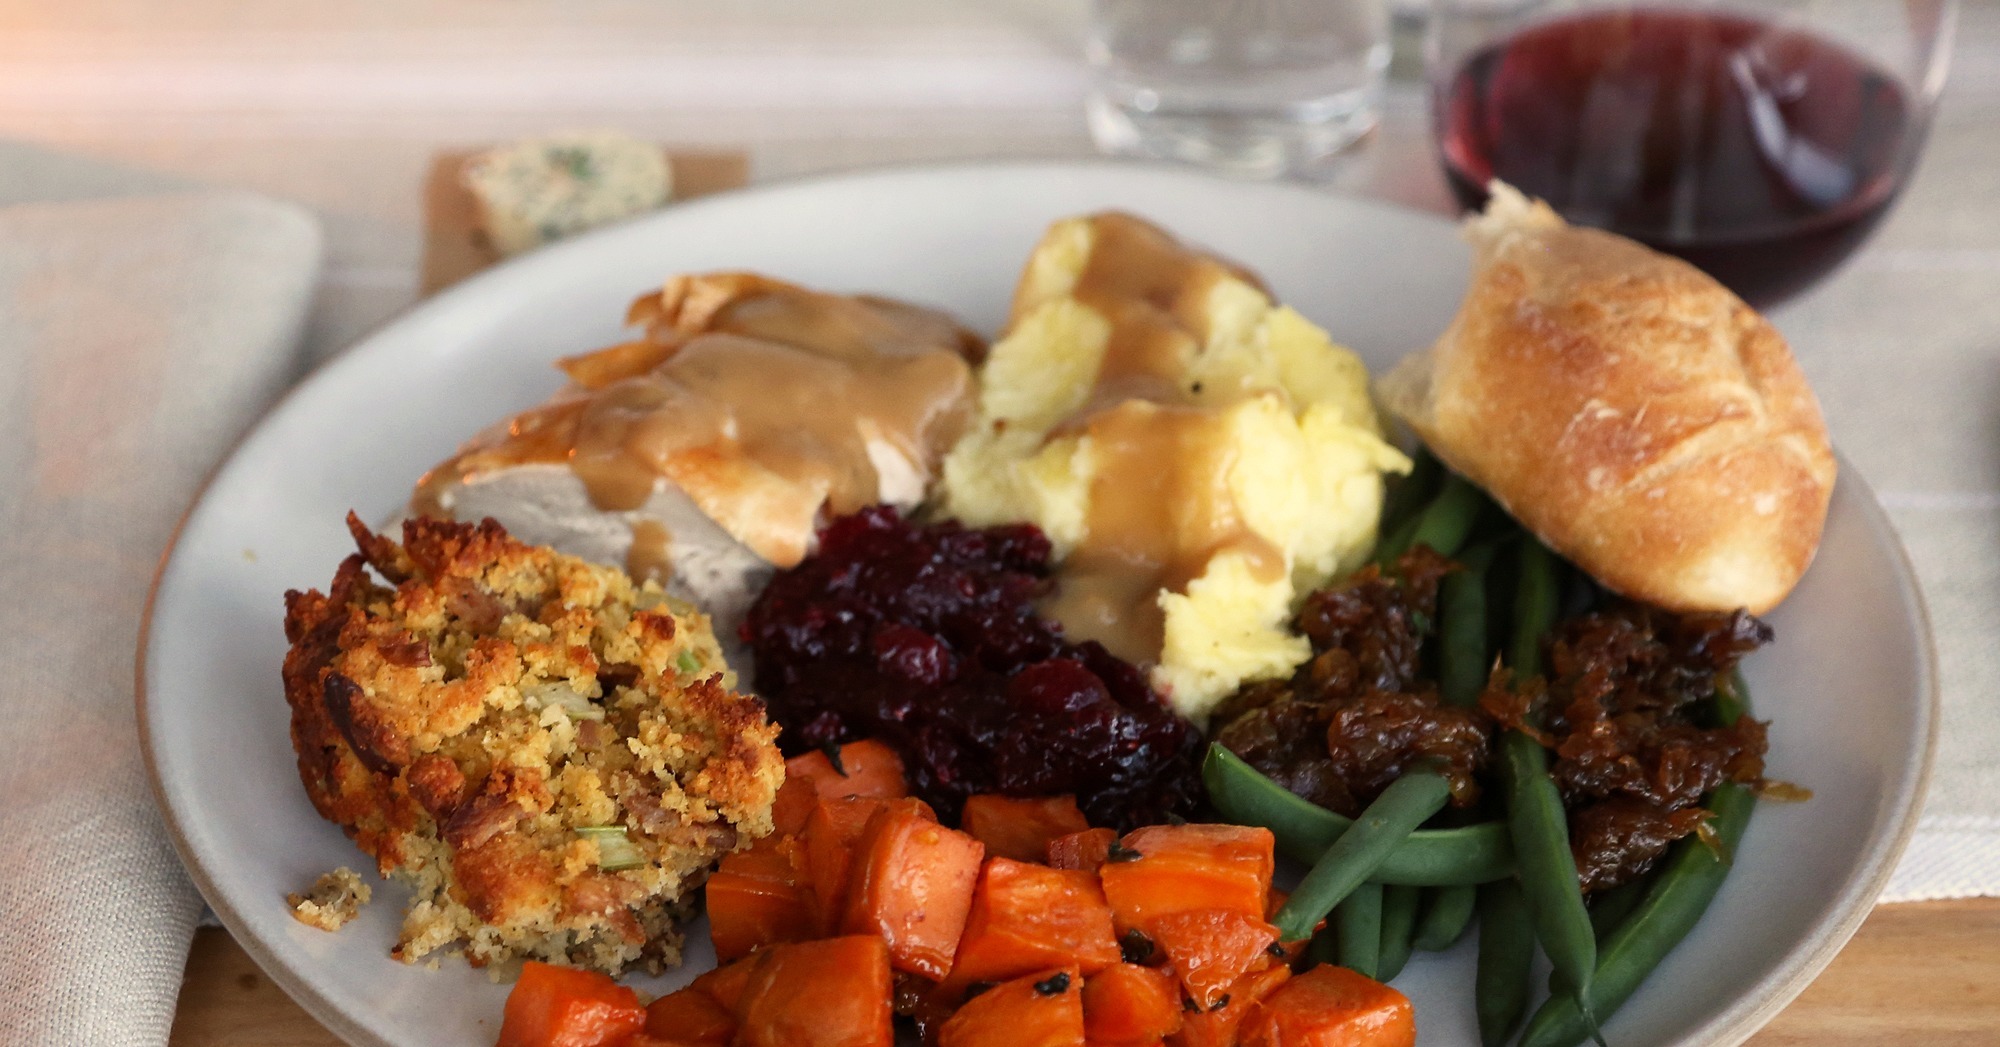 The Plate Classic Thanksgiving Dishes Done In 7 Ingredients Or Fewer